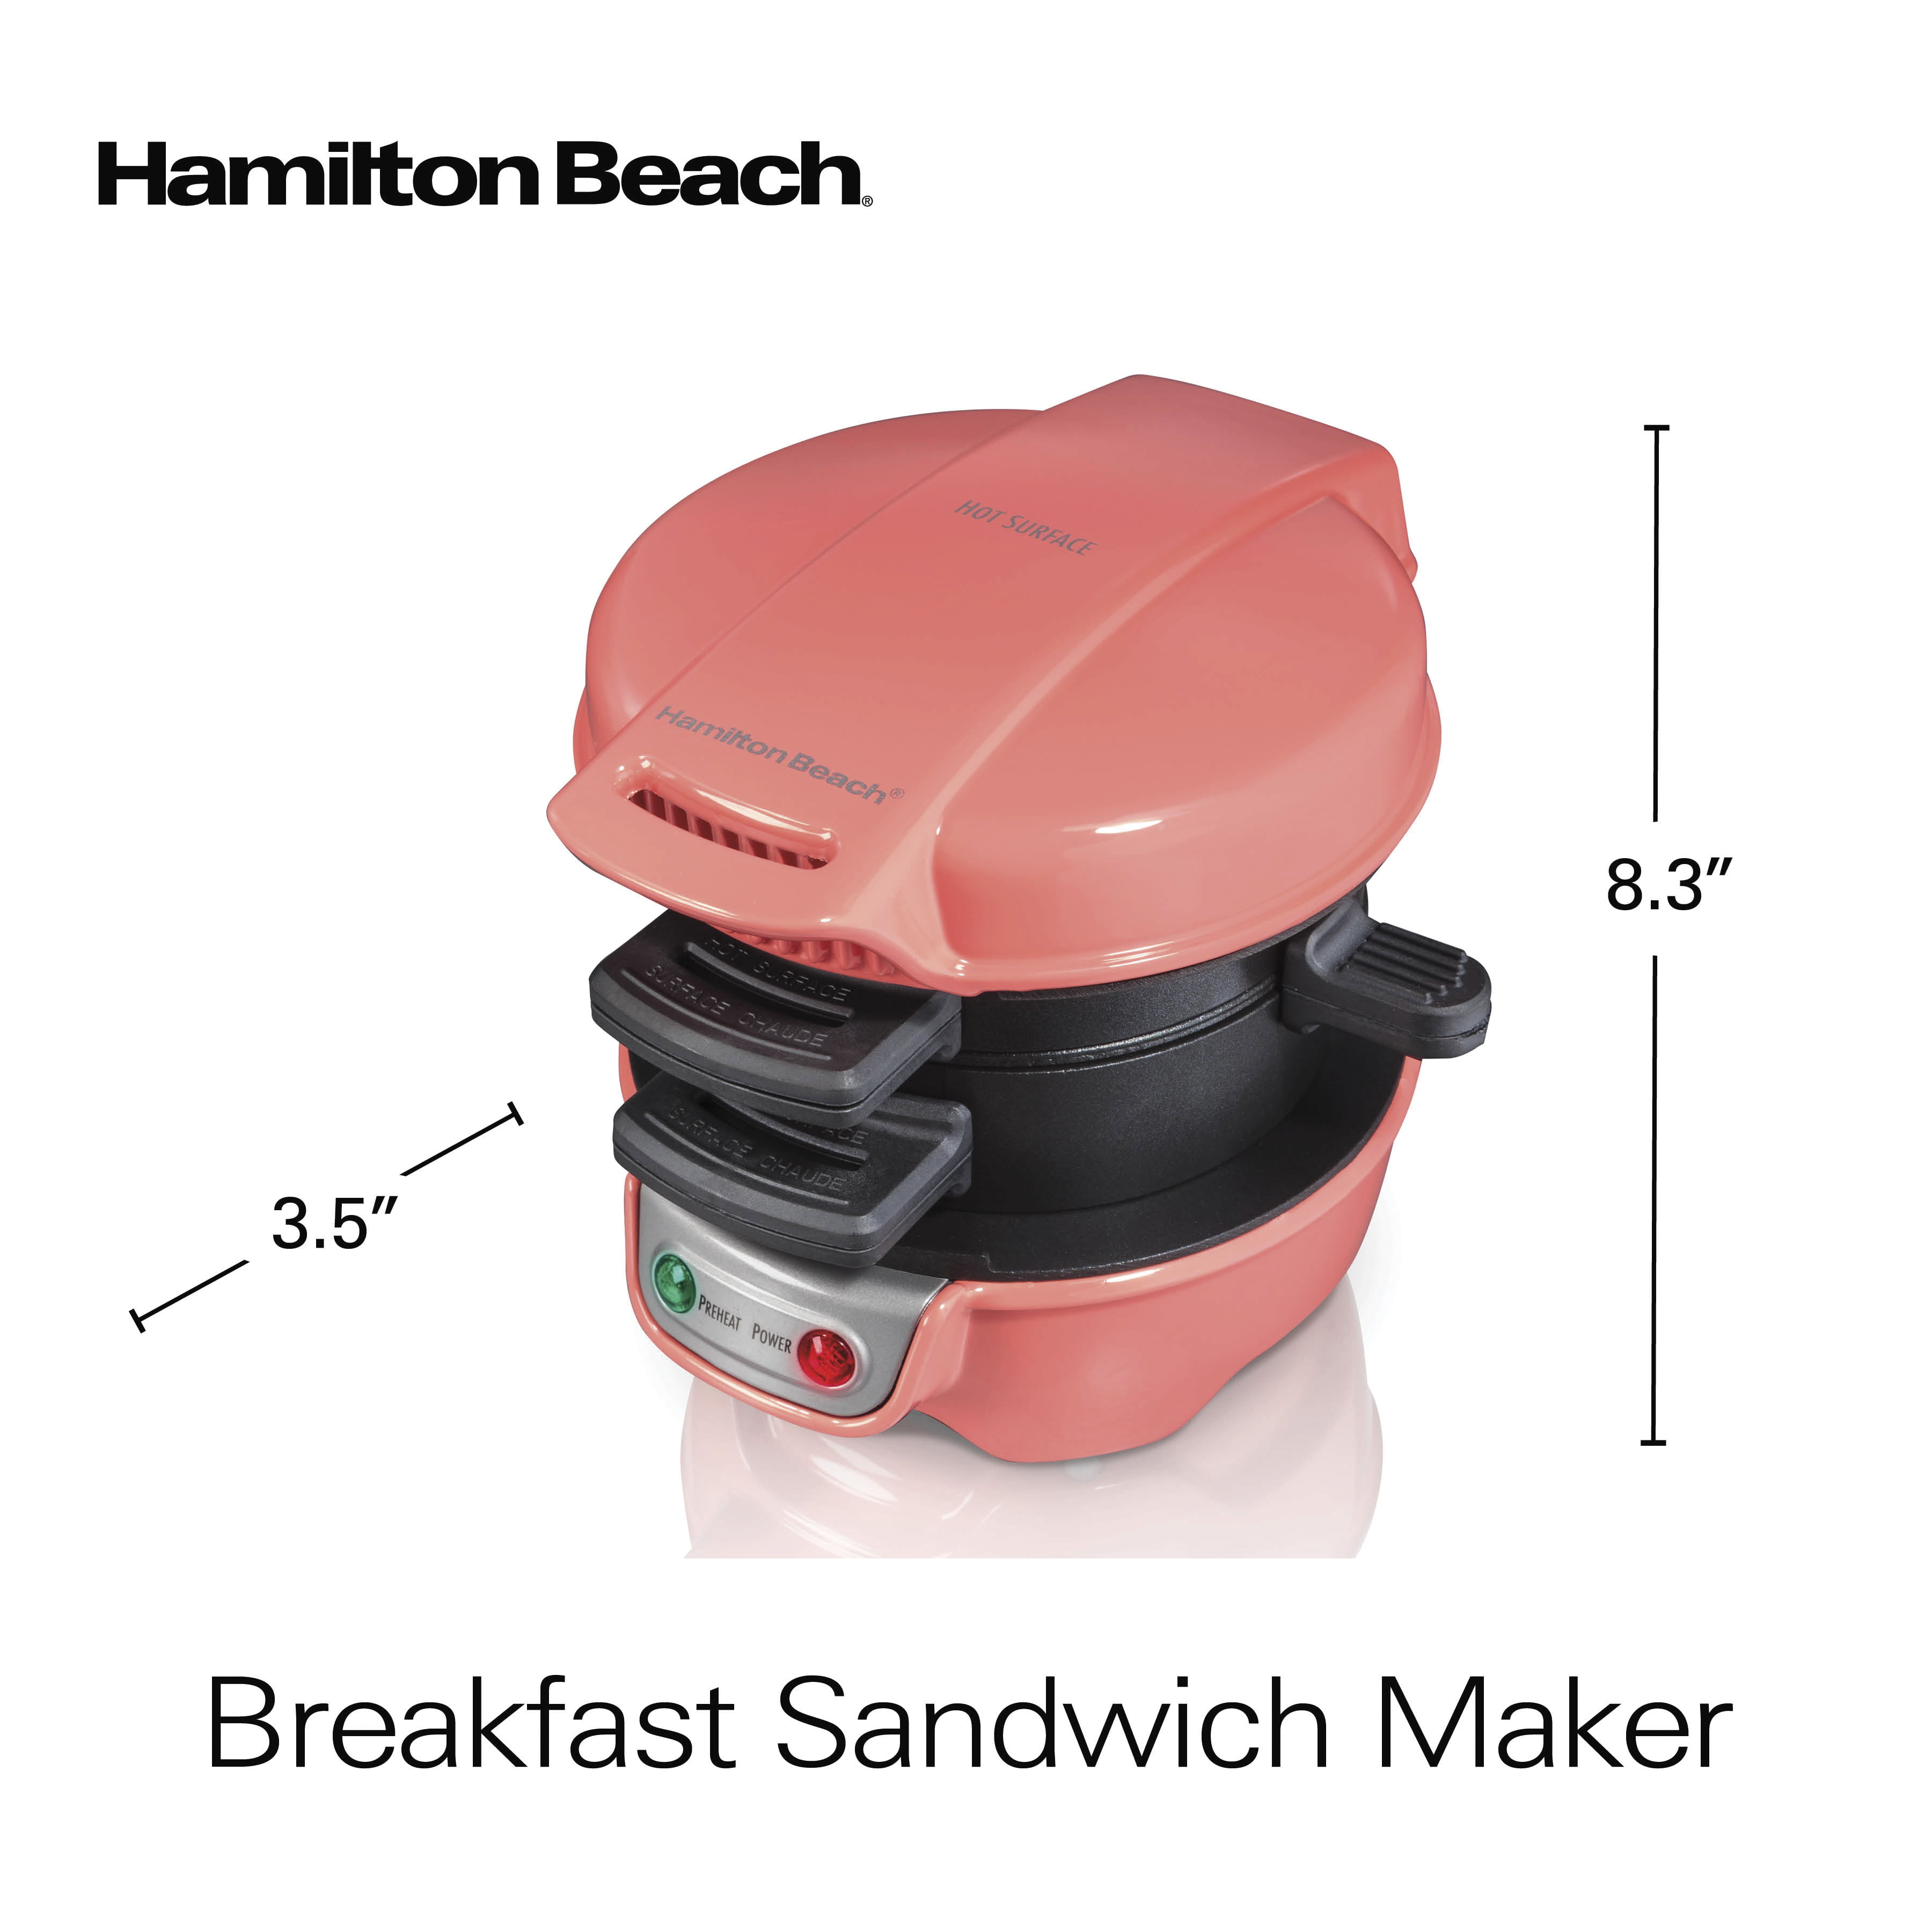 Hamilton Beach Breakfast Sandwich Maker with Egg Cooker Ring, Customize Ingredients, Perfect for English Muffins, Croissants, Mini Waffles, Dorm